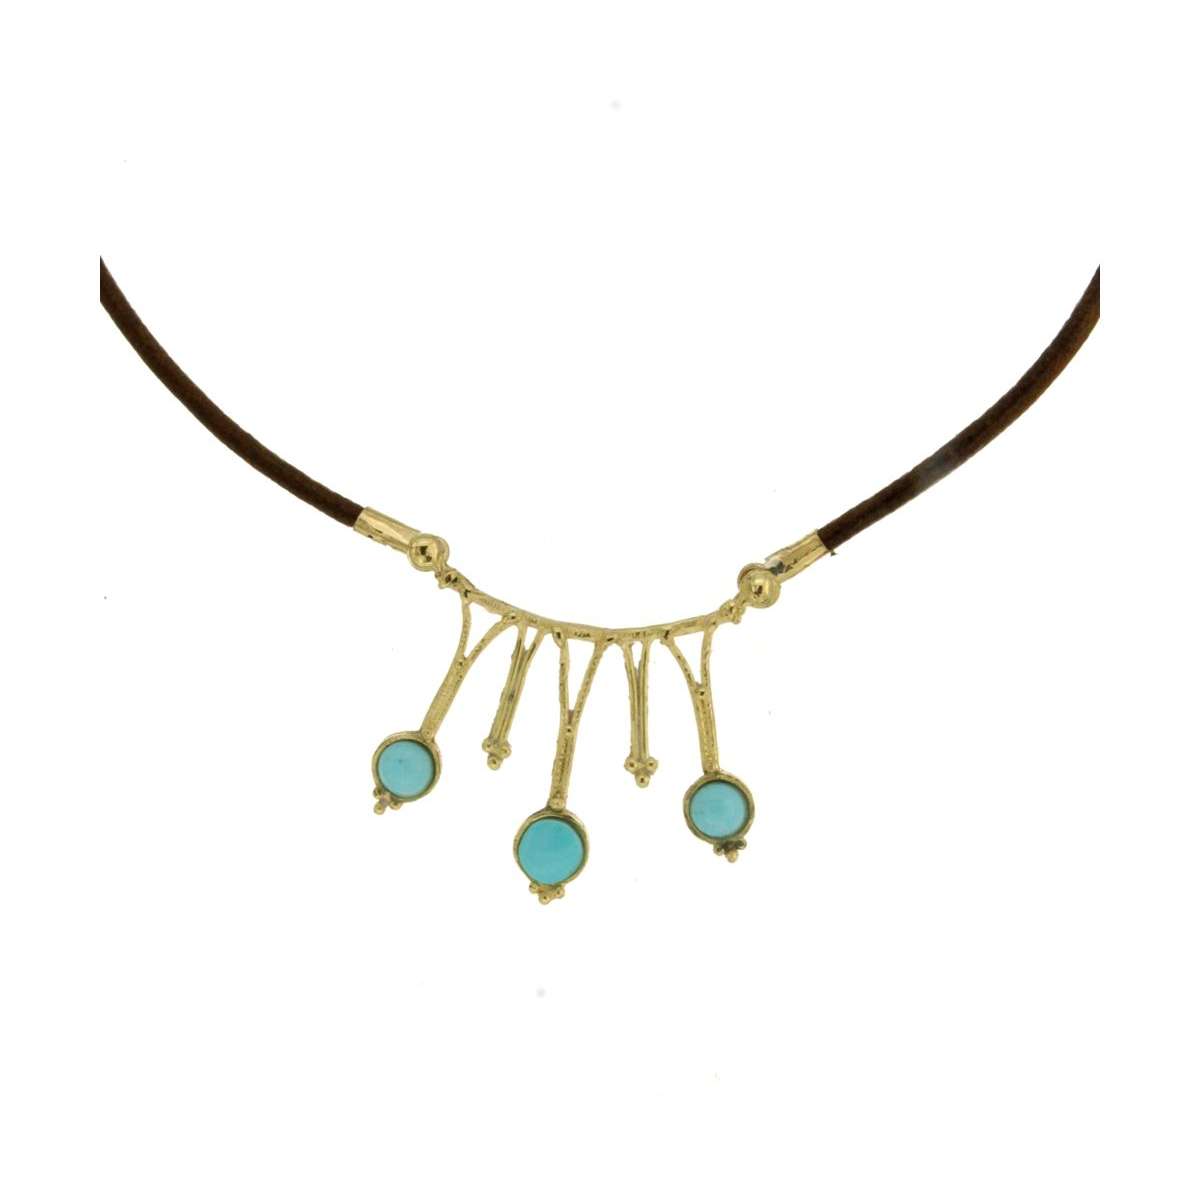 Necklace made with yellow gold in lost wax and turquoise paste